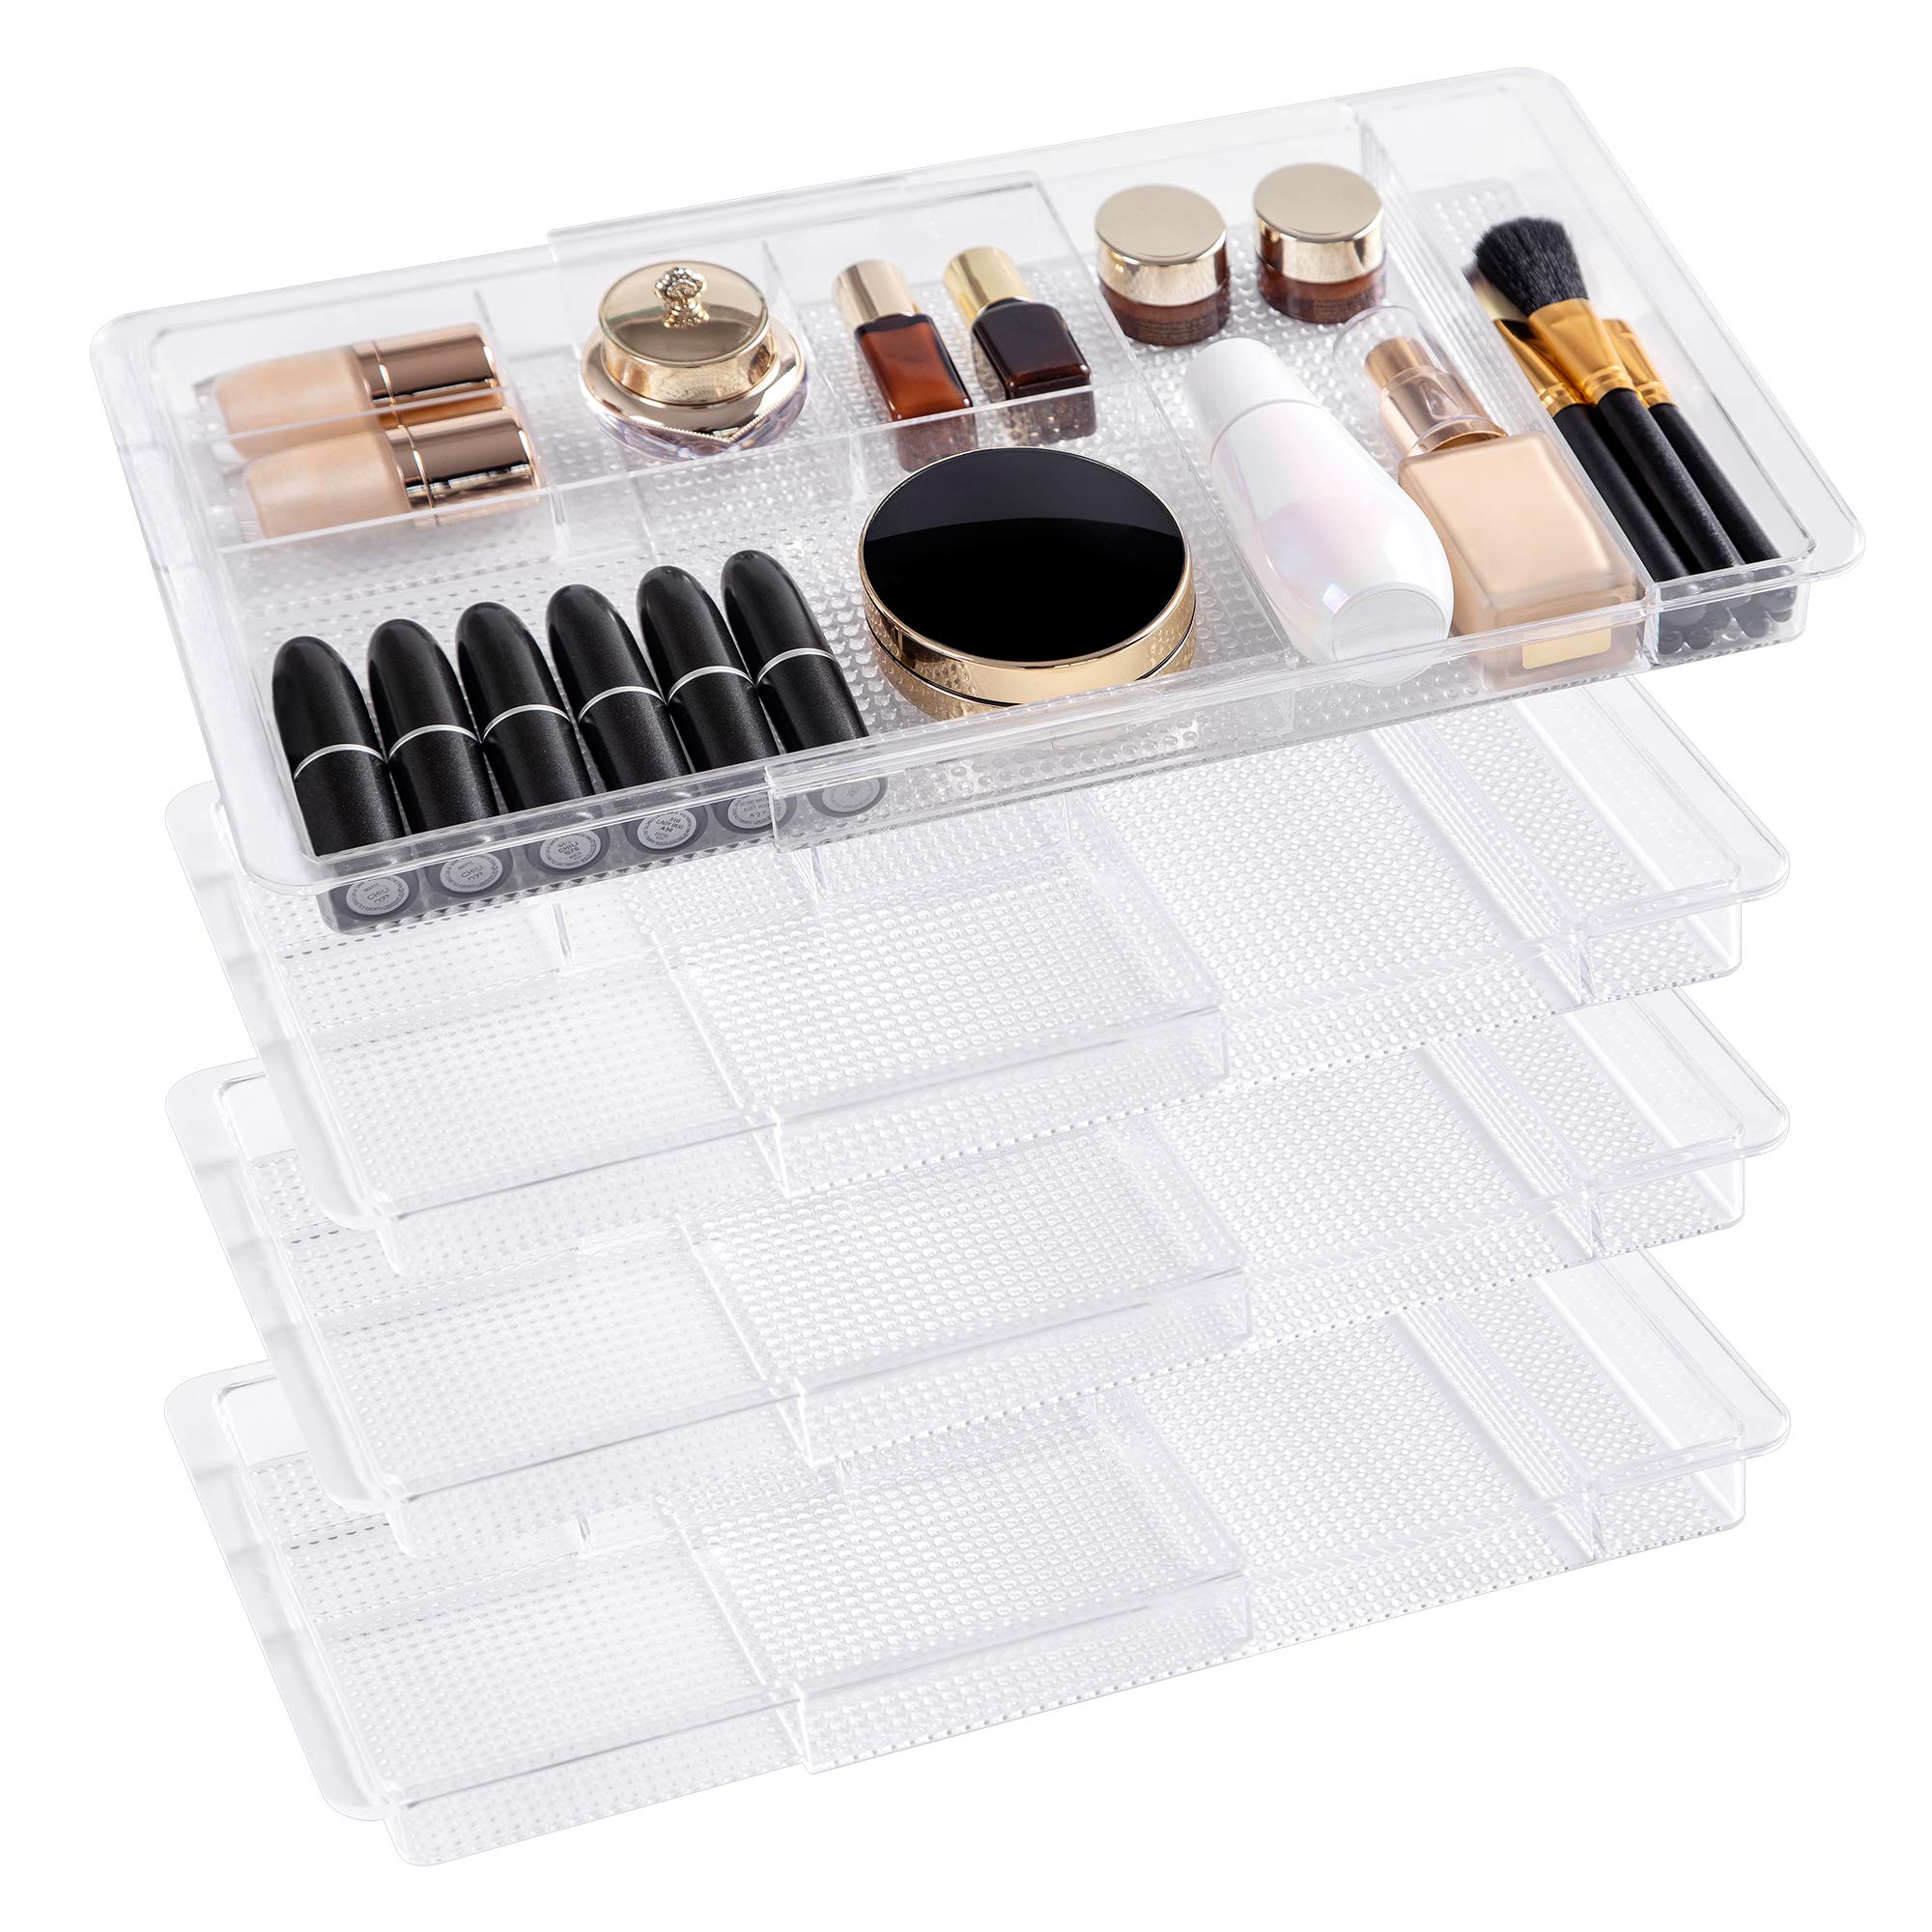 how to organize makeup drawer